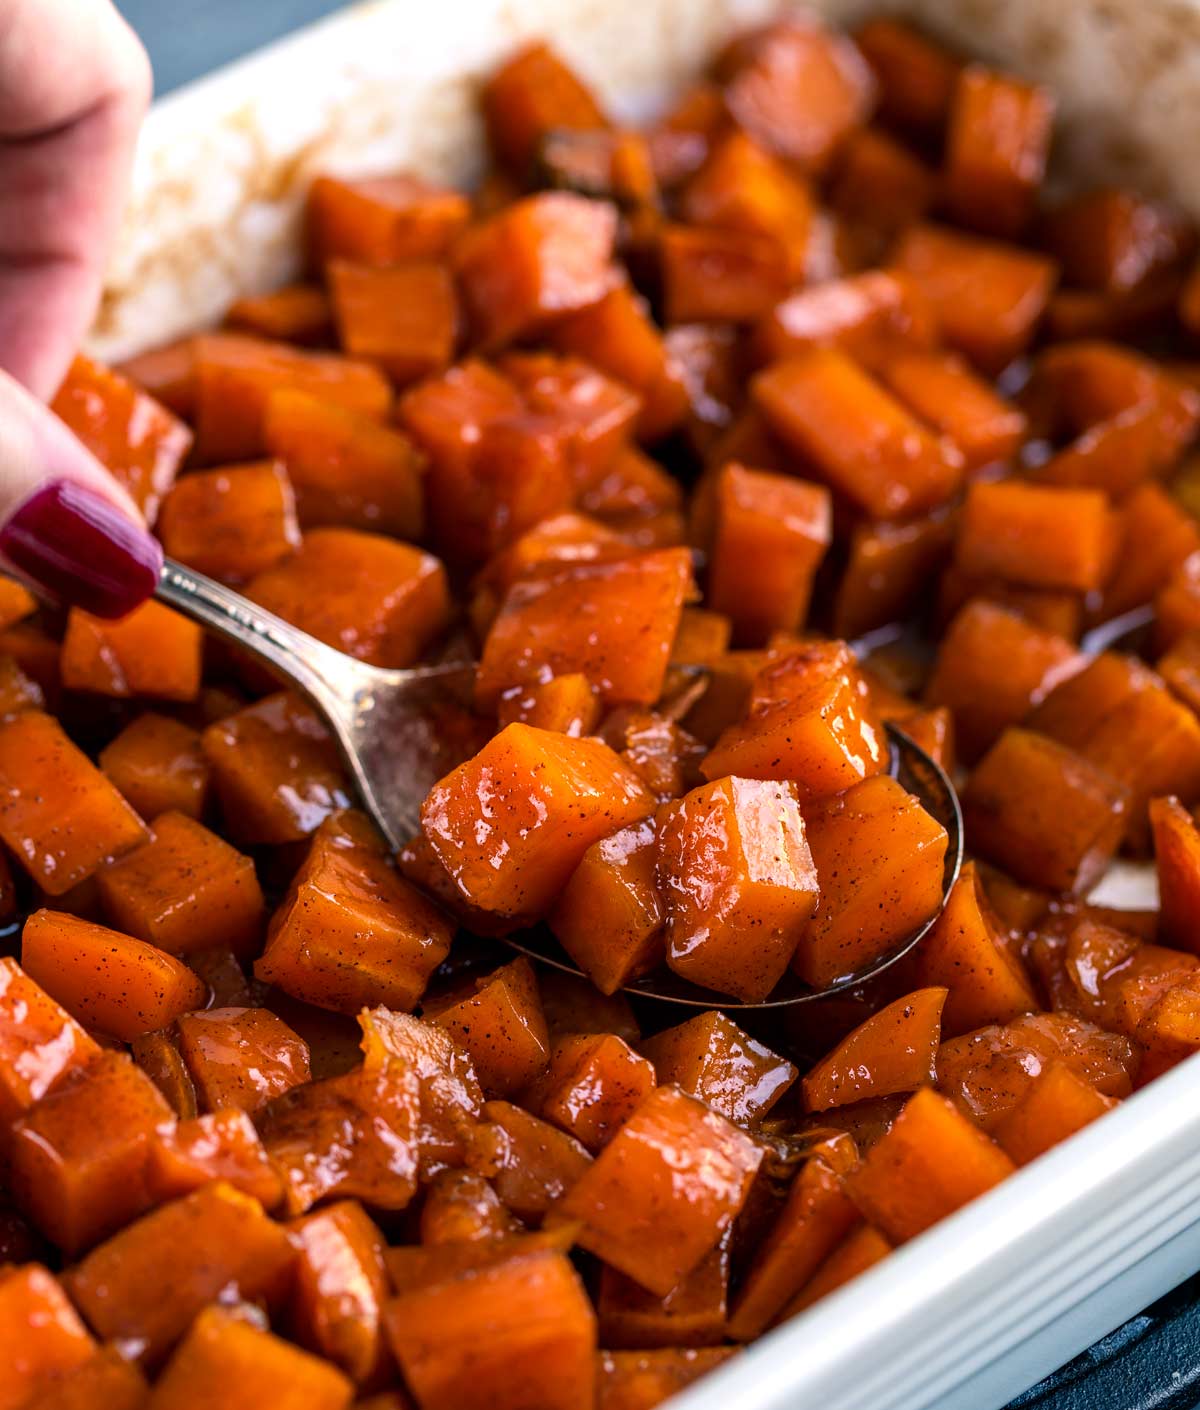 Candied yams in baking dish with spoon